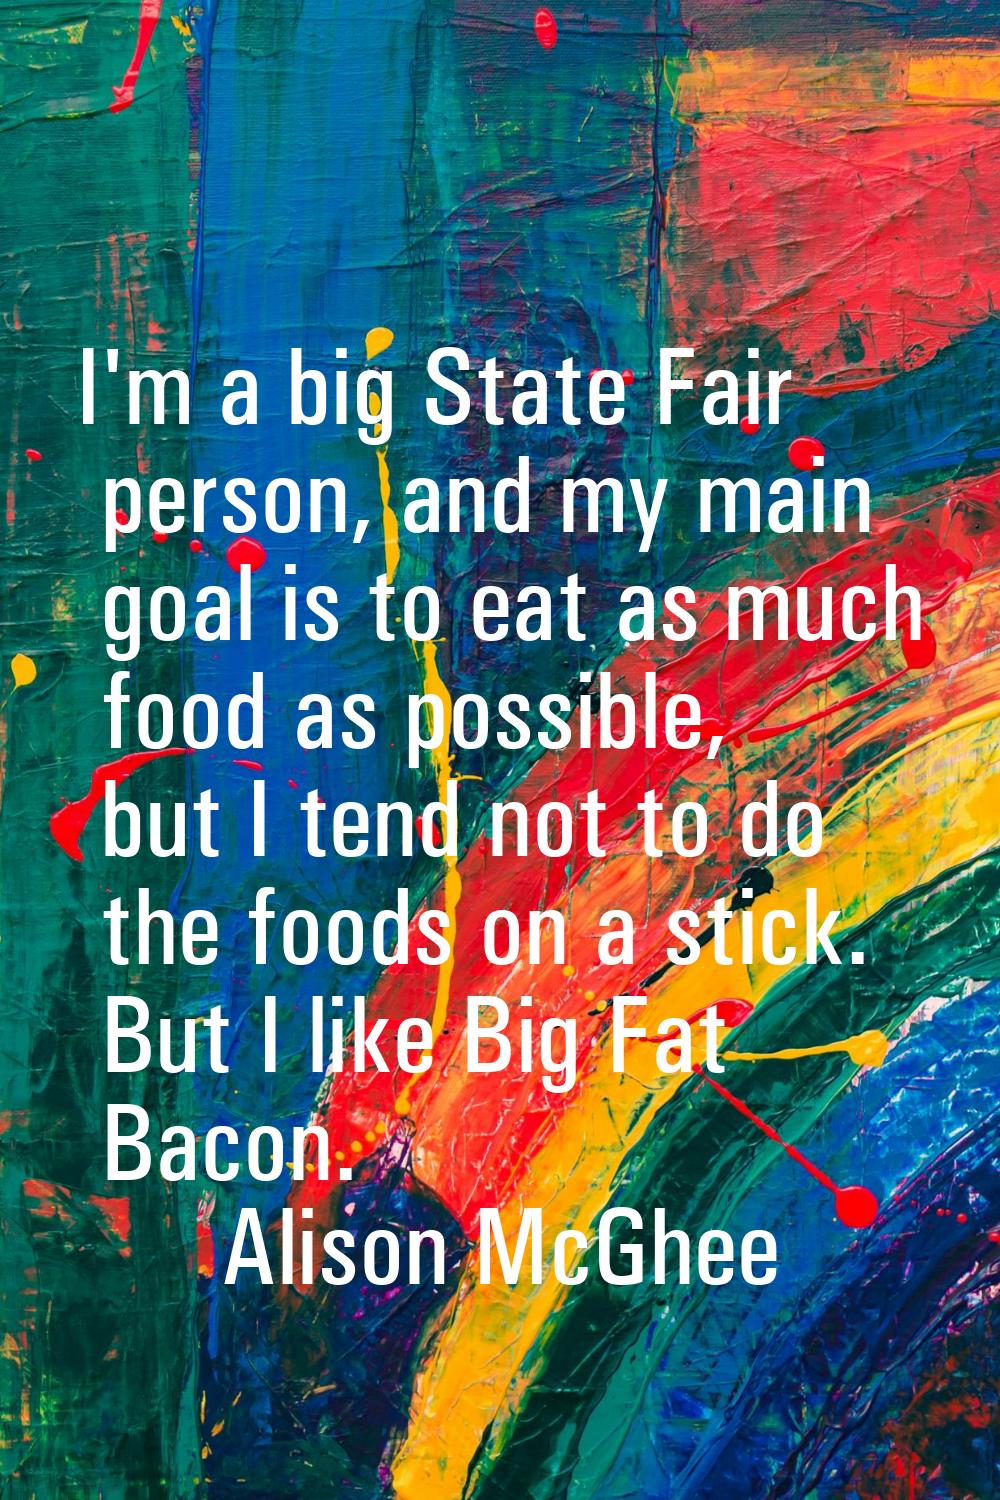 I'm a big State Fair person, and my main goal is to eat as much food as possible, but I tend not to